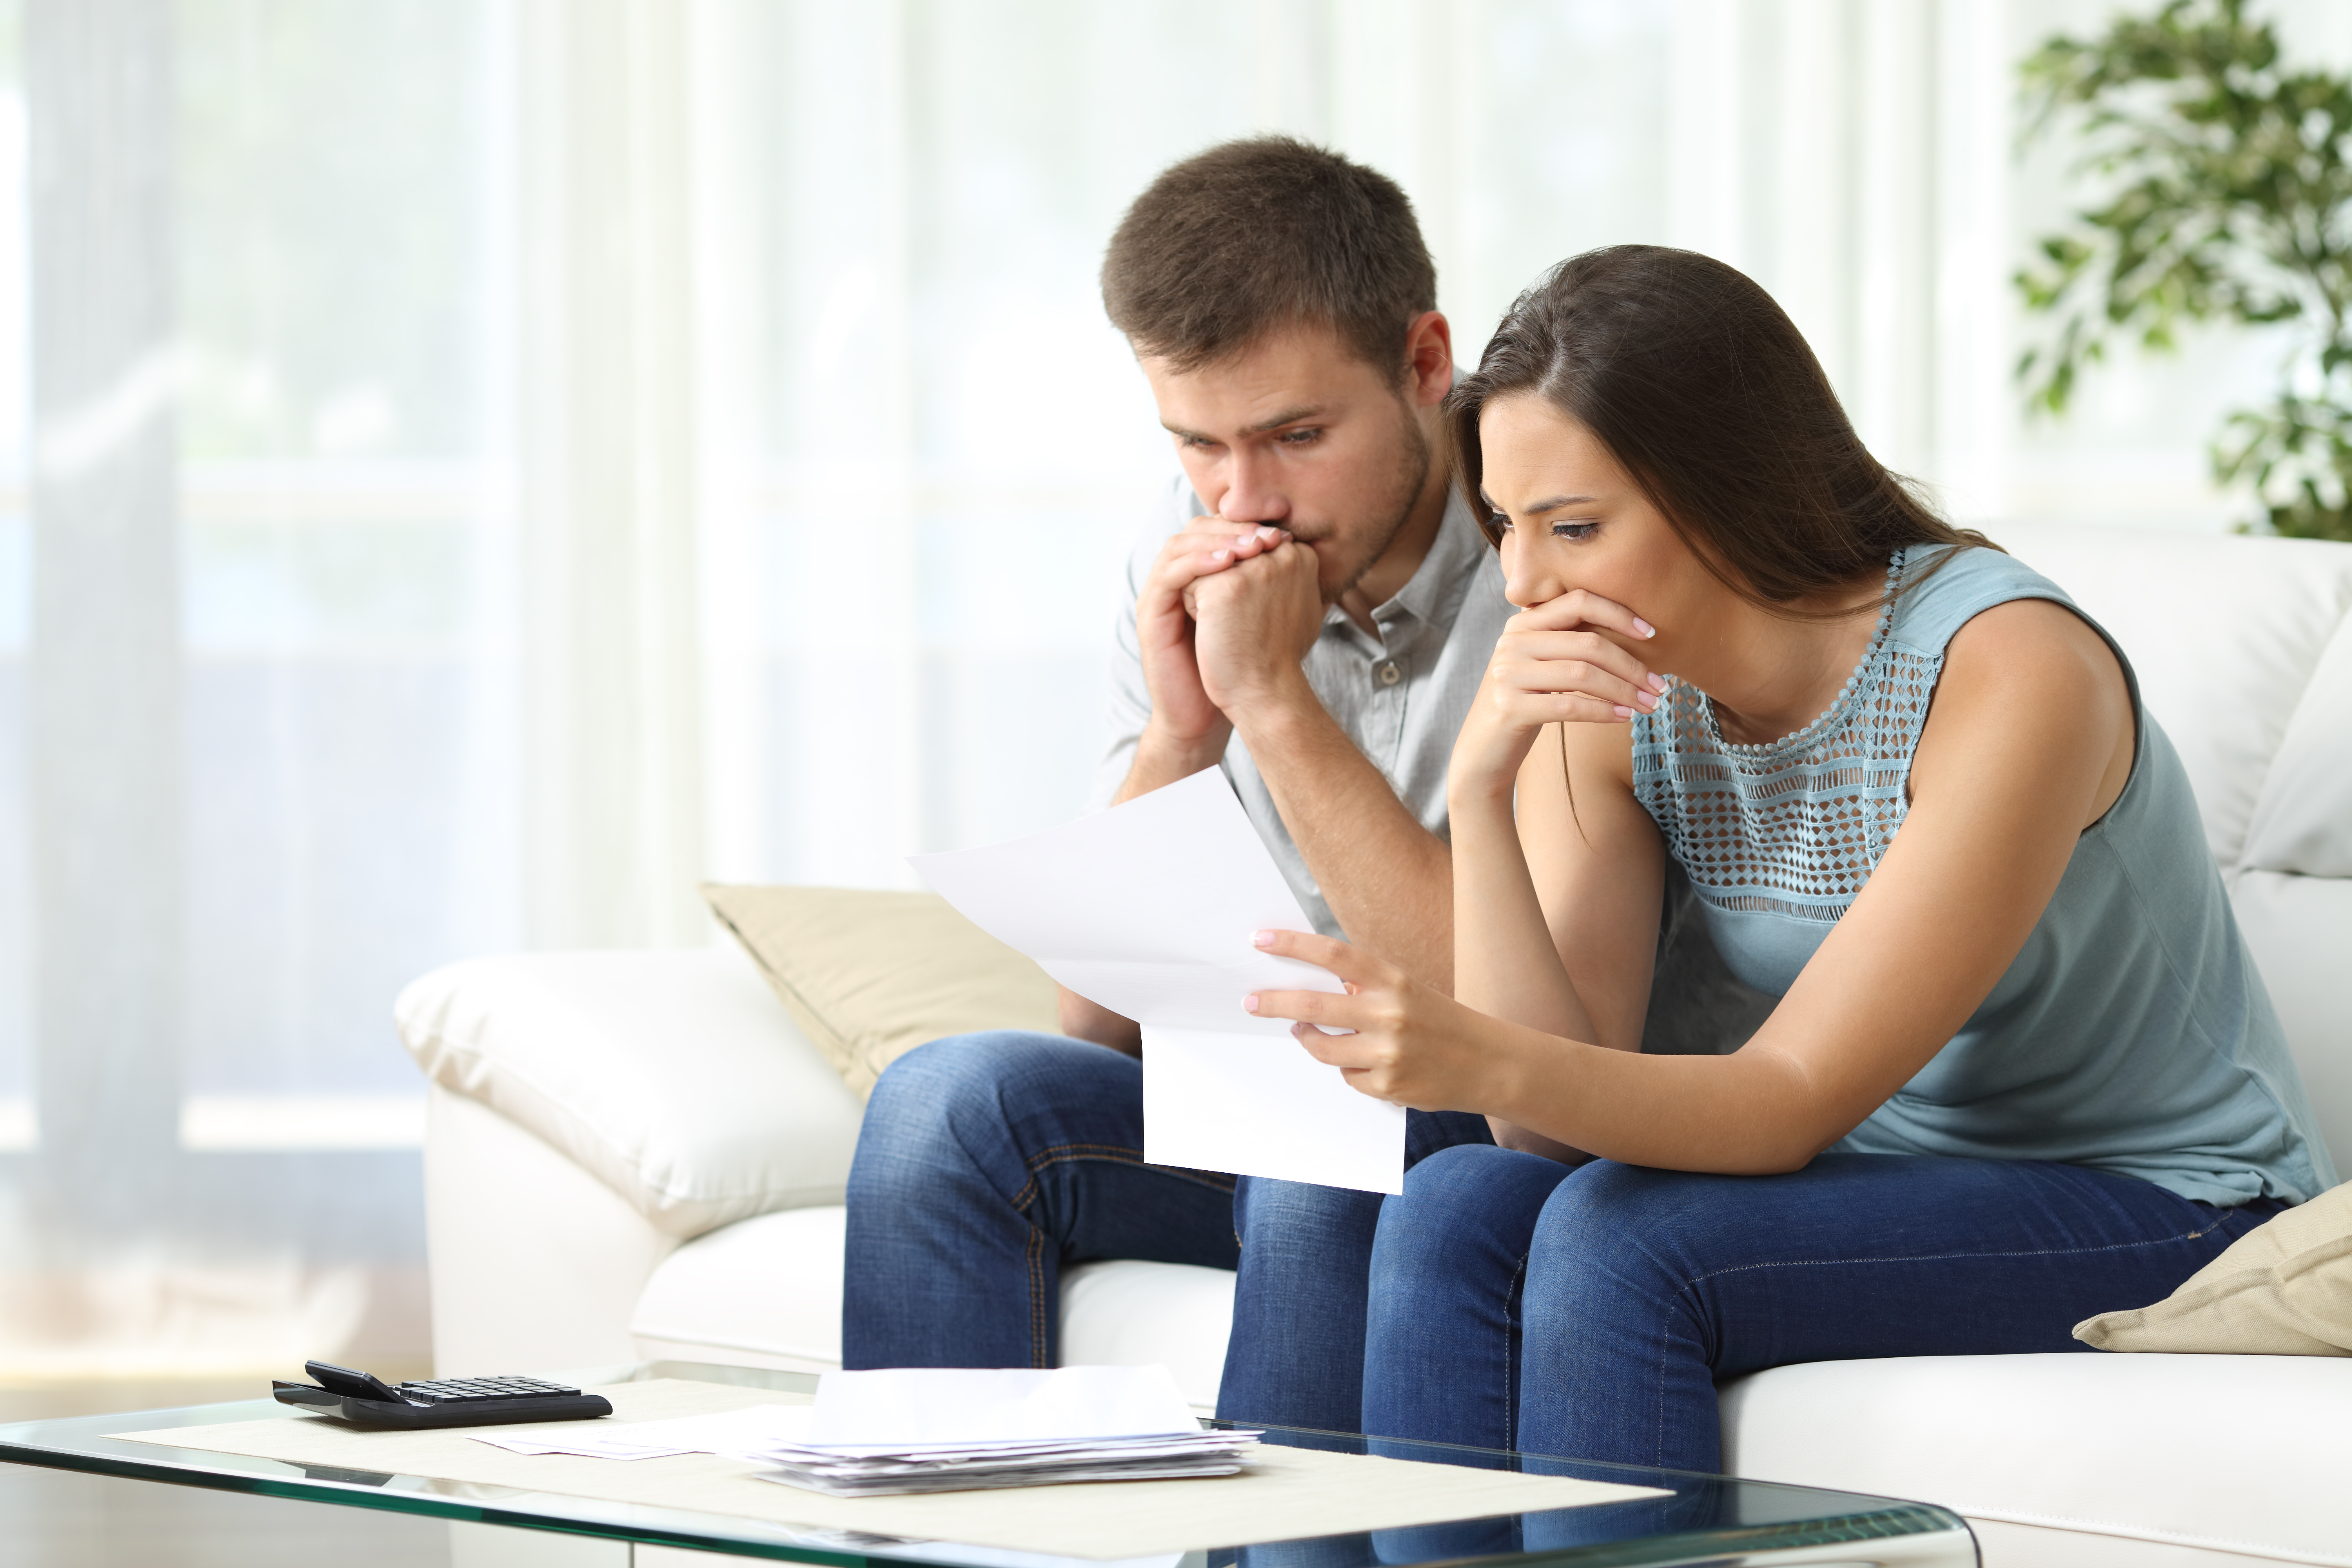 A worried couple looking at a document | Source: Shutterstock